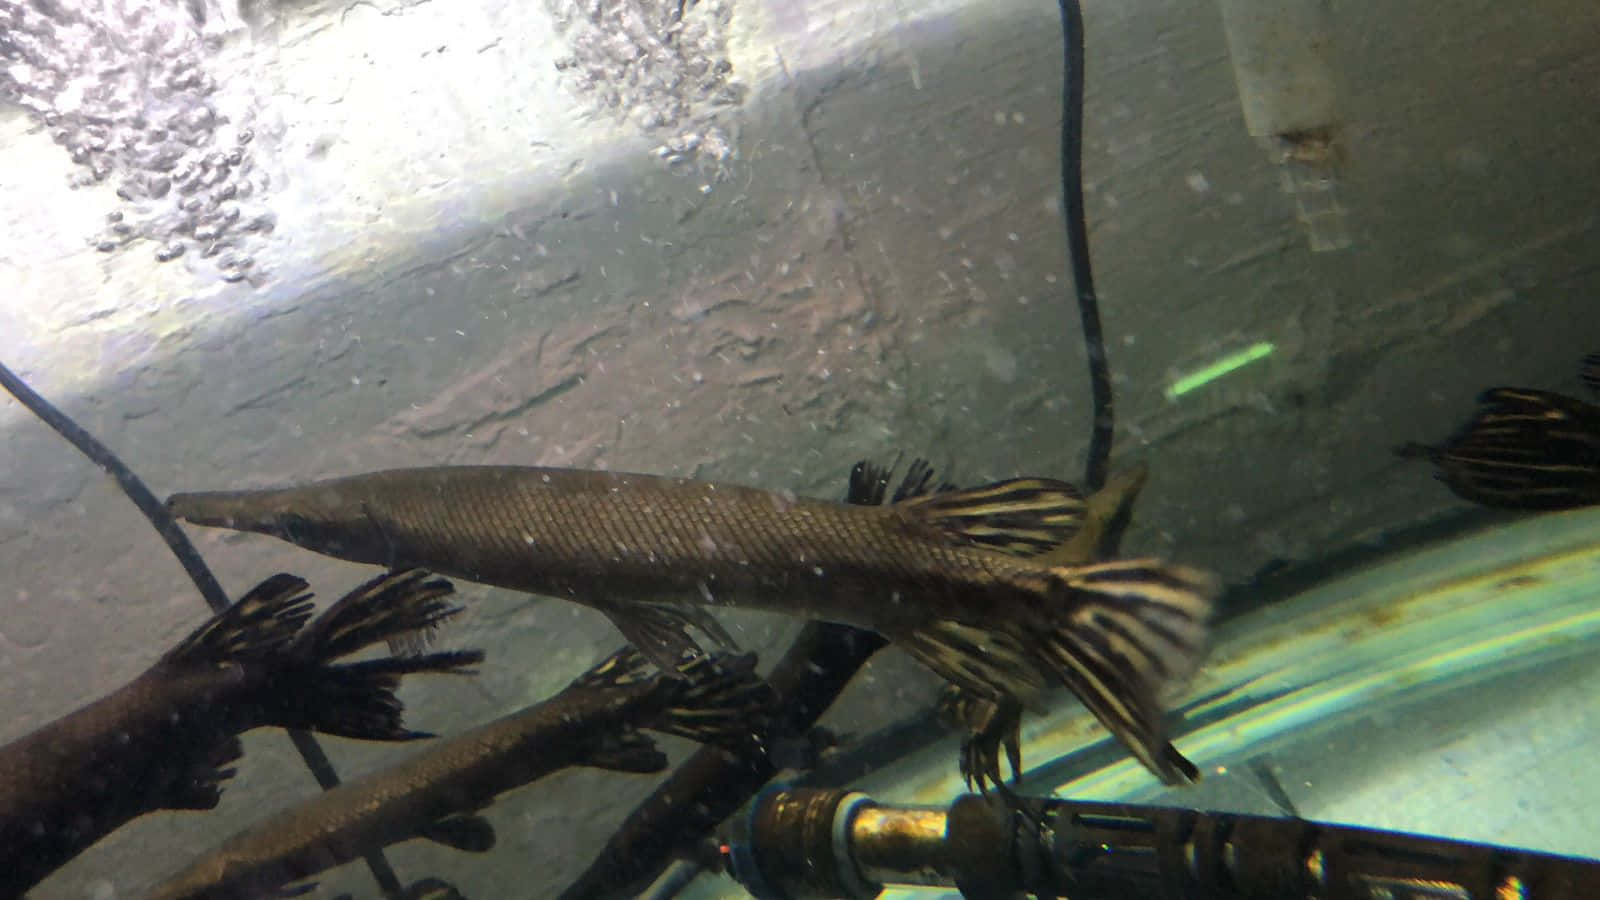 Intriguing Gar Fish With Remarkable Features